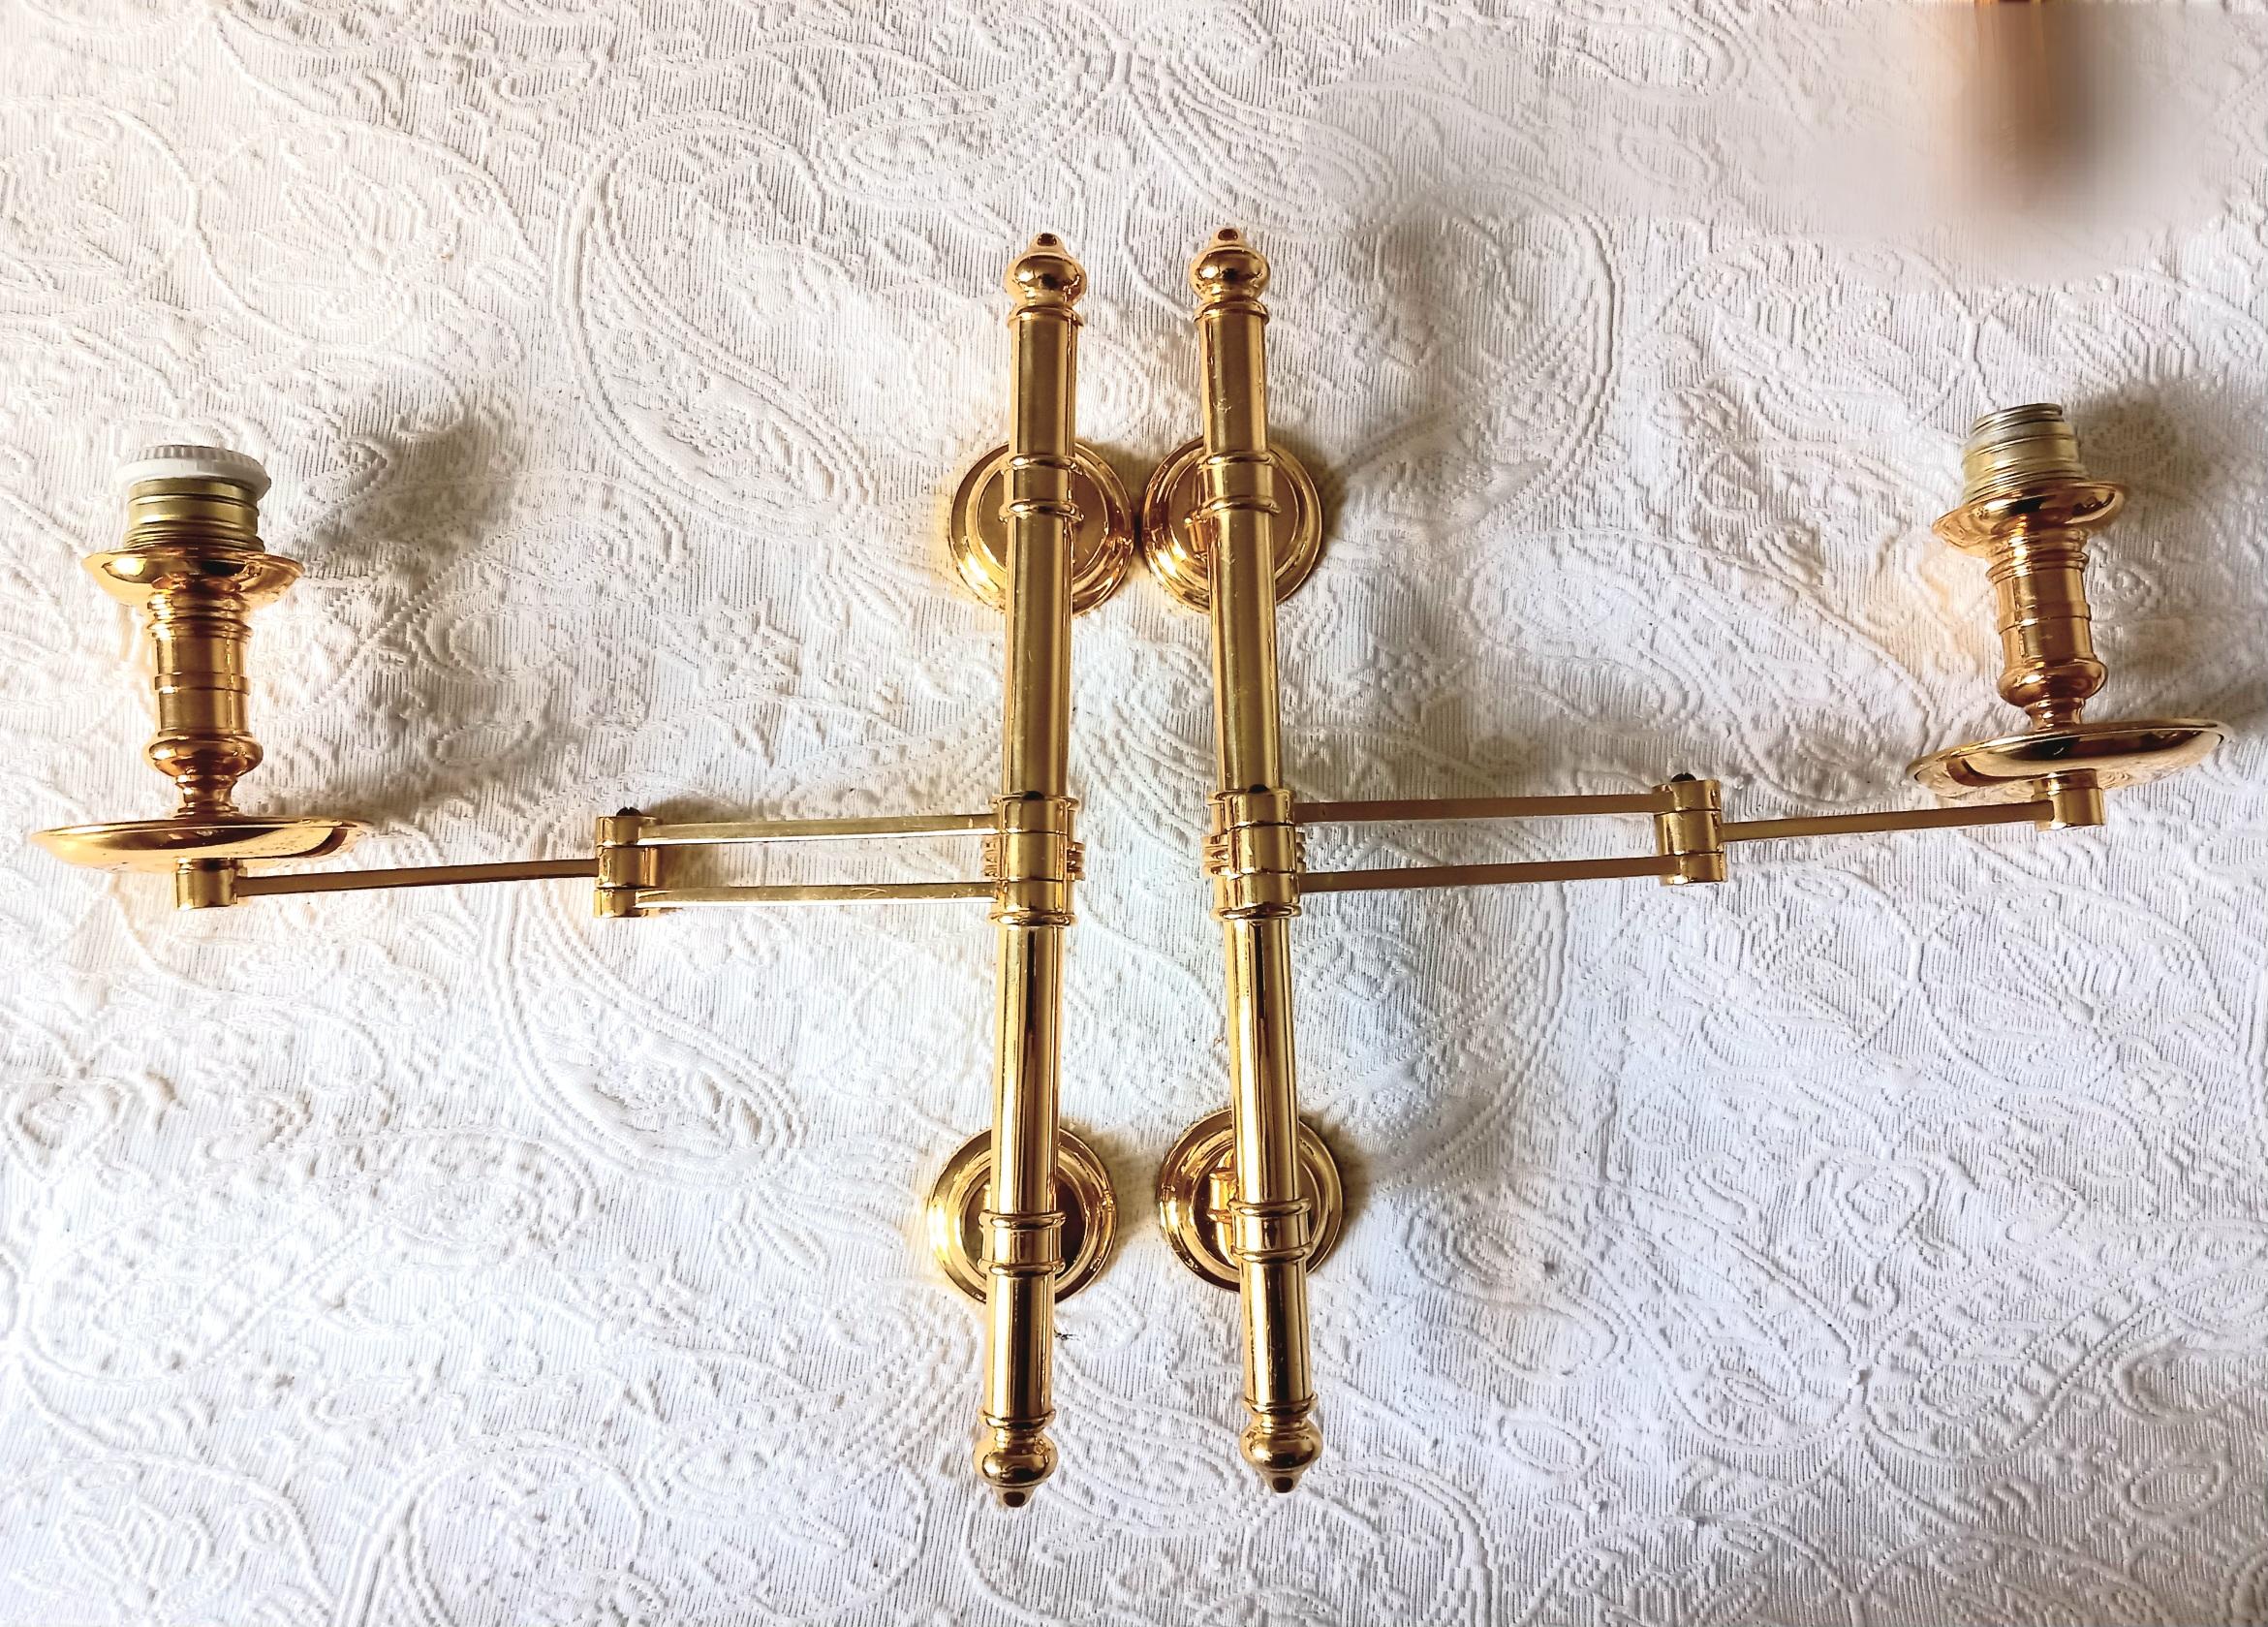  Pair of French Maison Jansen Swing Arm Sconces In Excellent Condition For Sale In Mombuey, Zamora